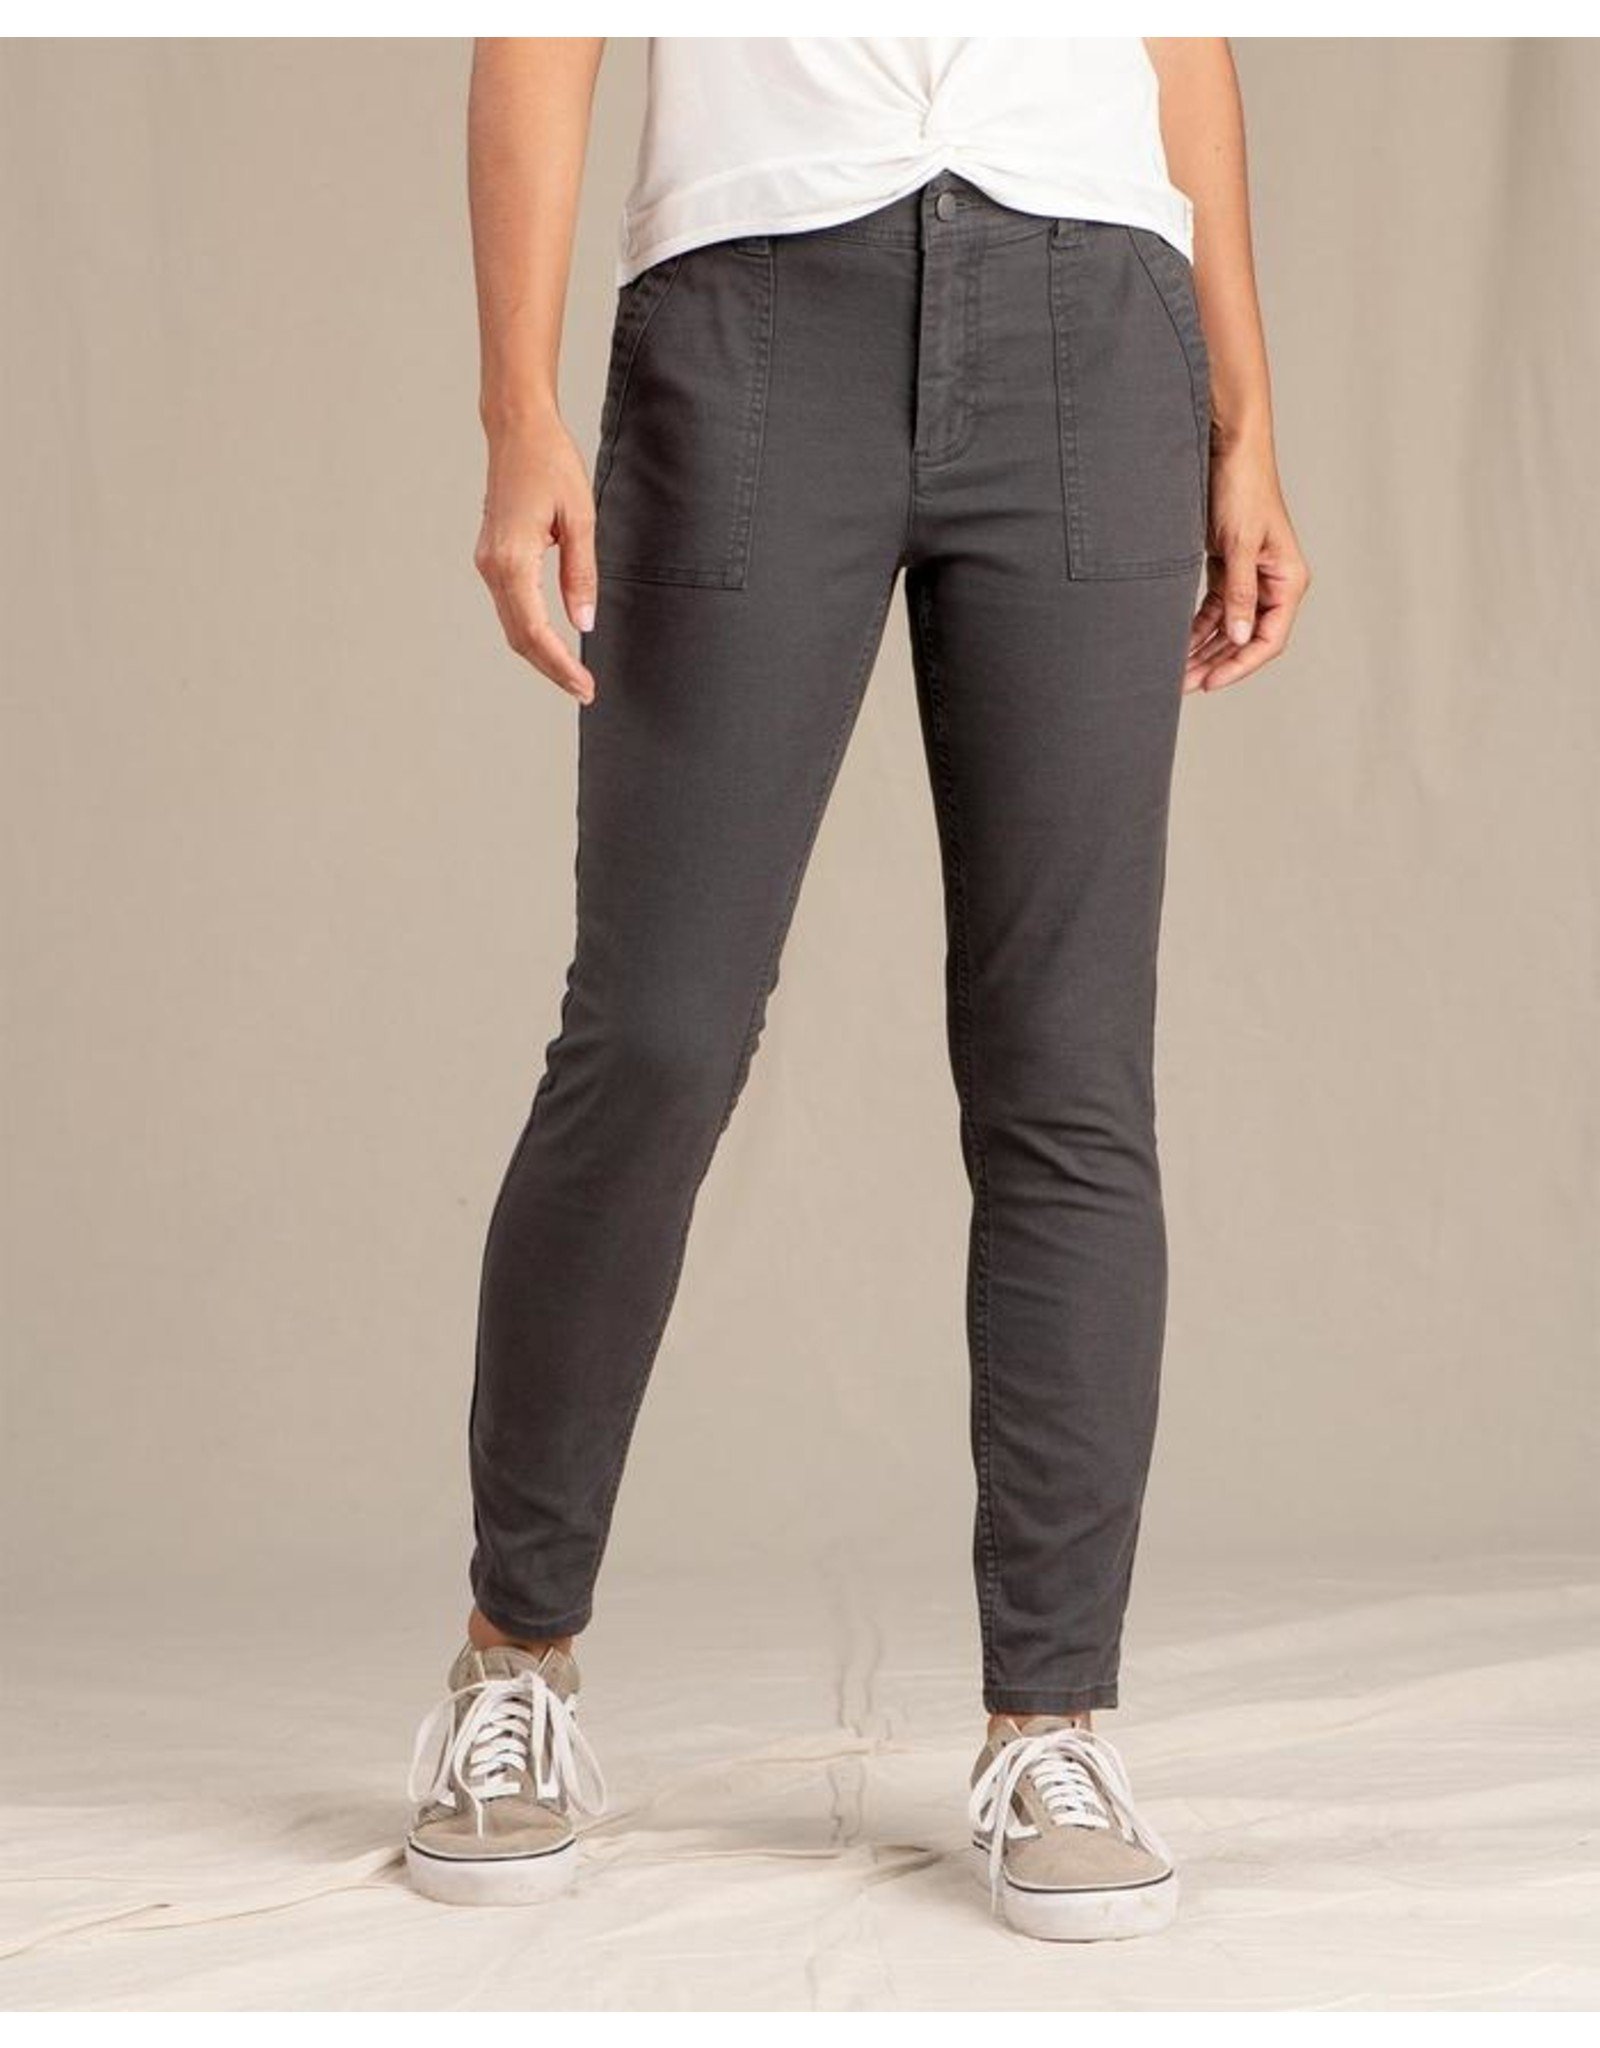 Earthworks Ankle Pants